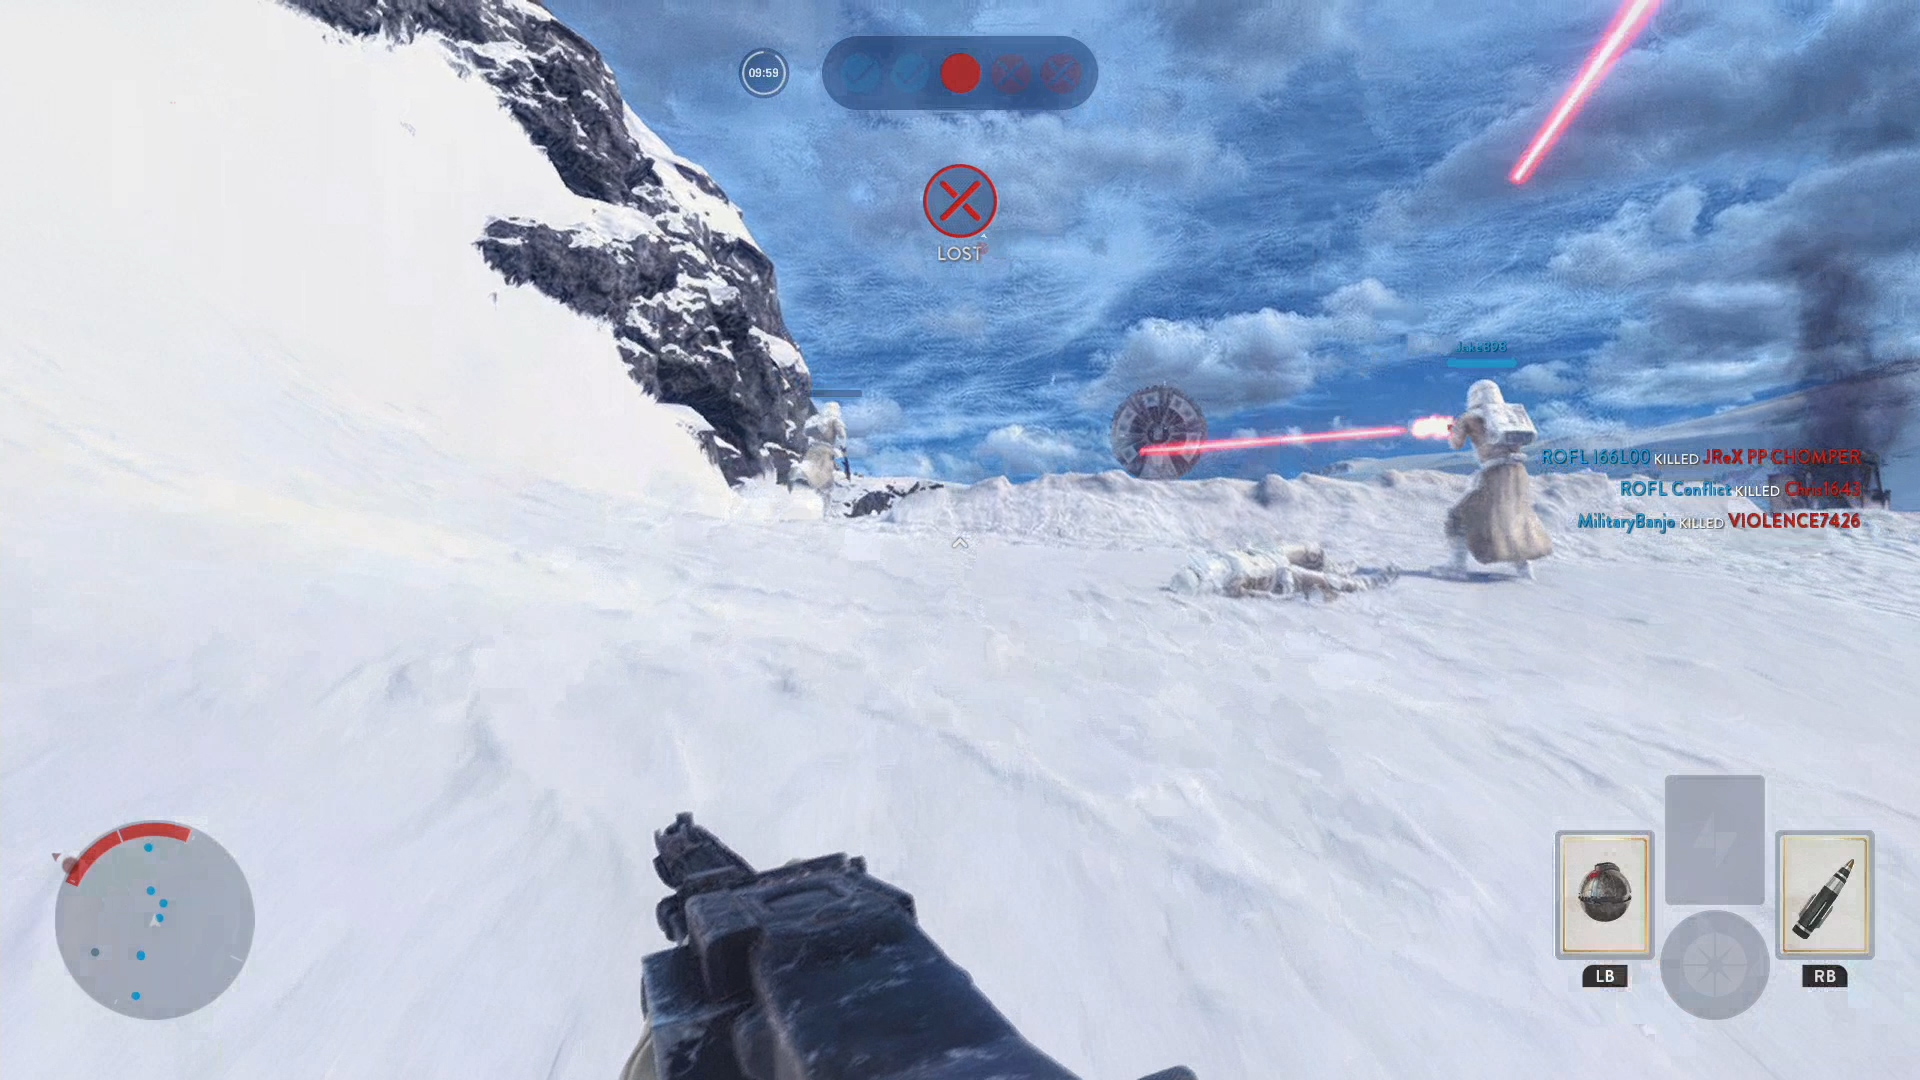 Star Wars: Battlefront Helped Me Understand How The Empire Lost On Endor